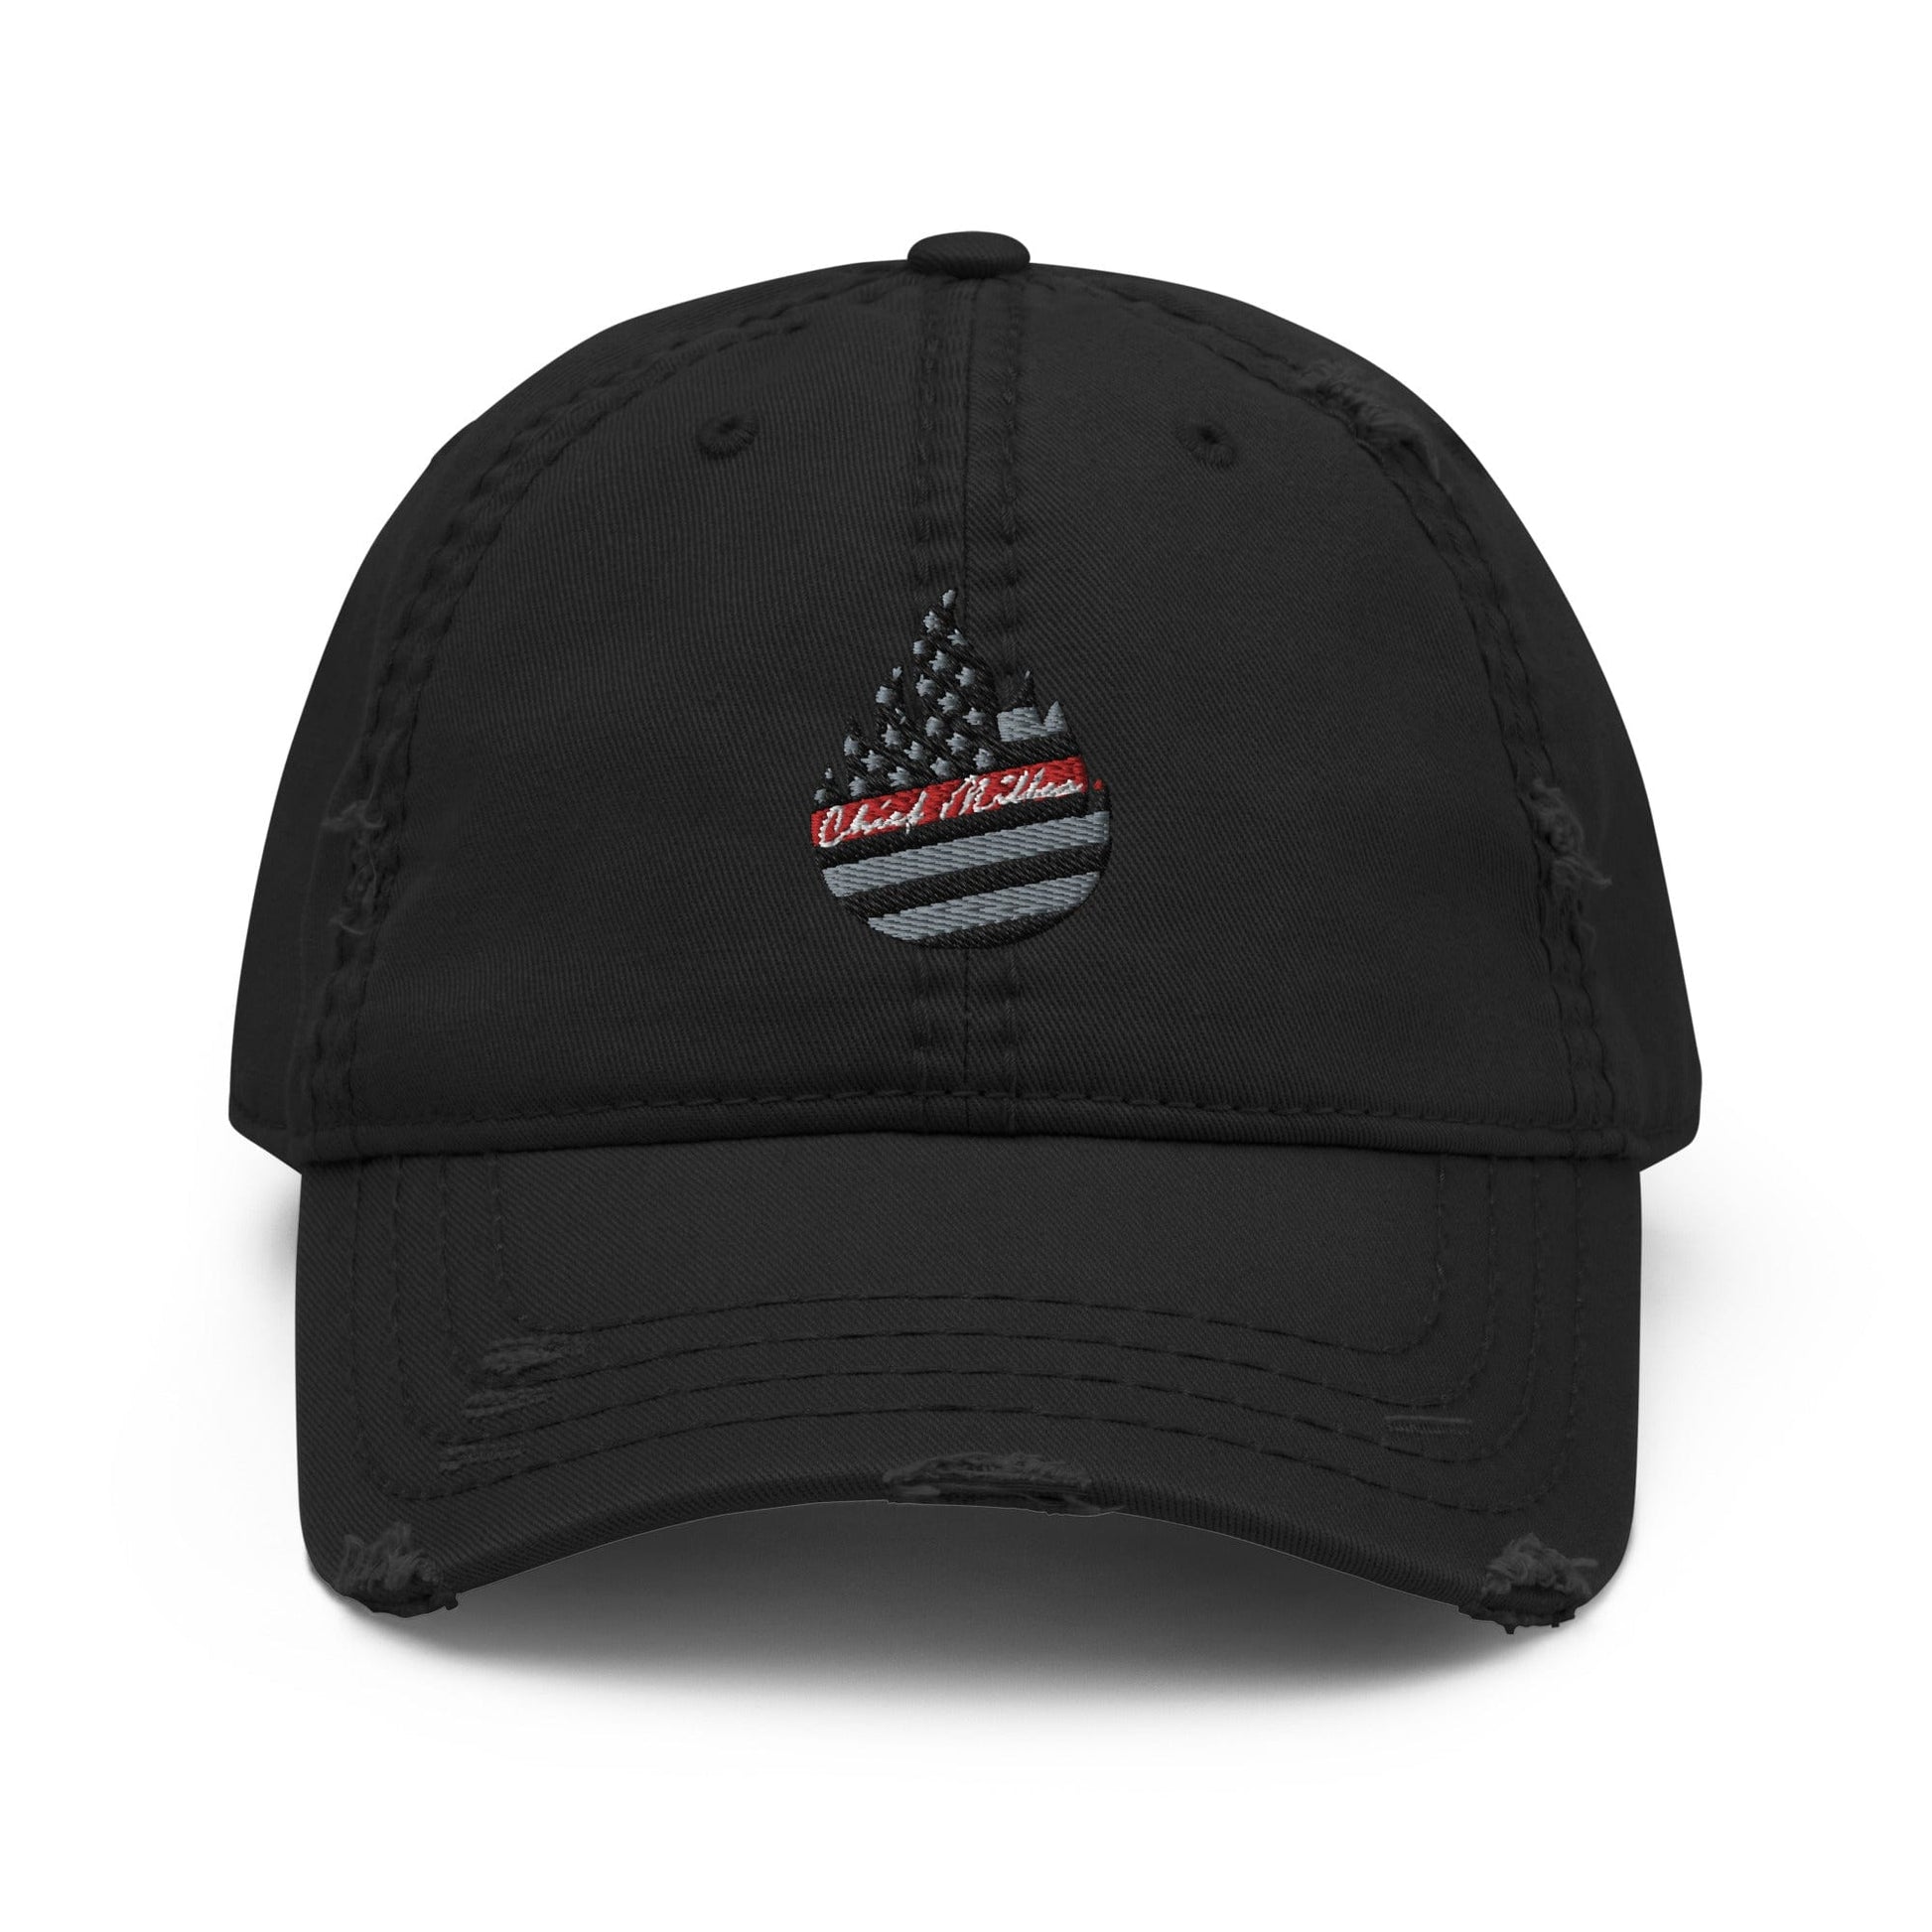 Chief Miller Distressed Chief Miller Hat Apparel